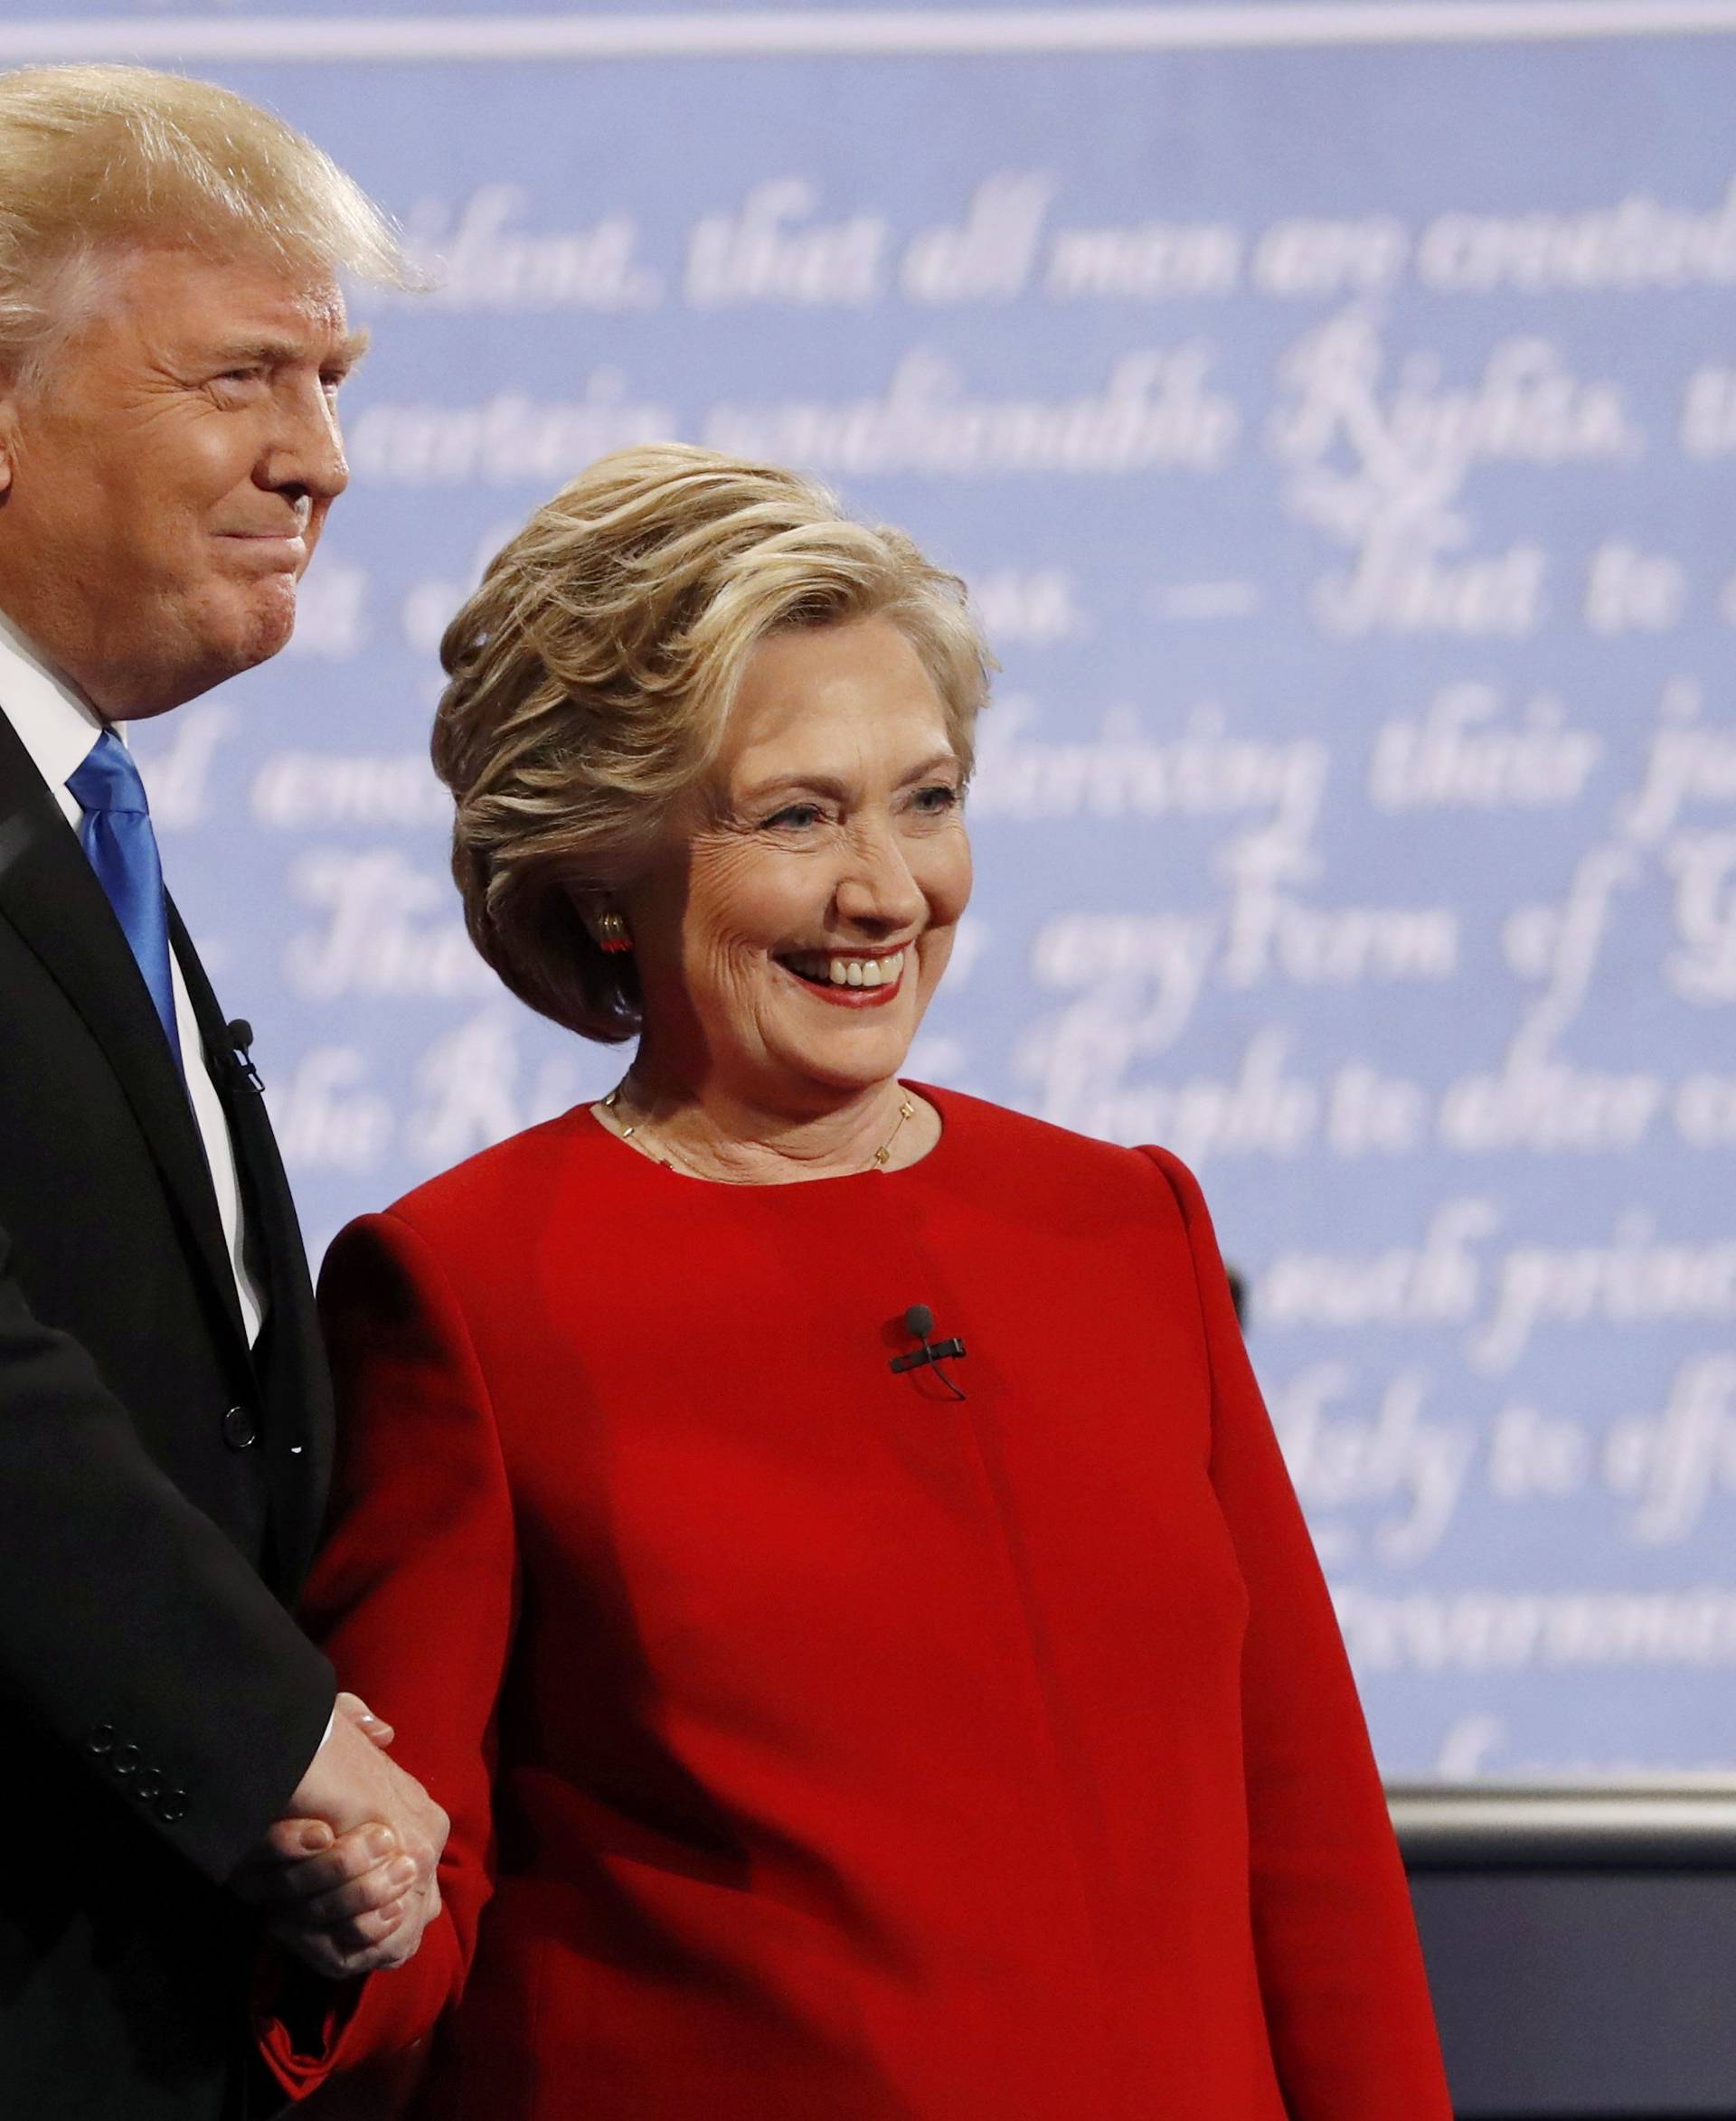 Republican U.S. presidential nominee Donald Trump and Democratic U.S. presidential nominee Hillary Clinton shake hands at the start of their first presidential debate at Hofstra University in Hempstead